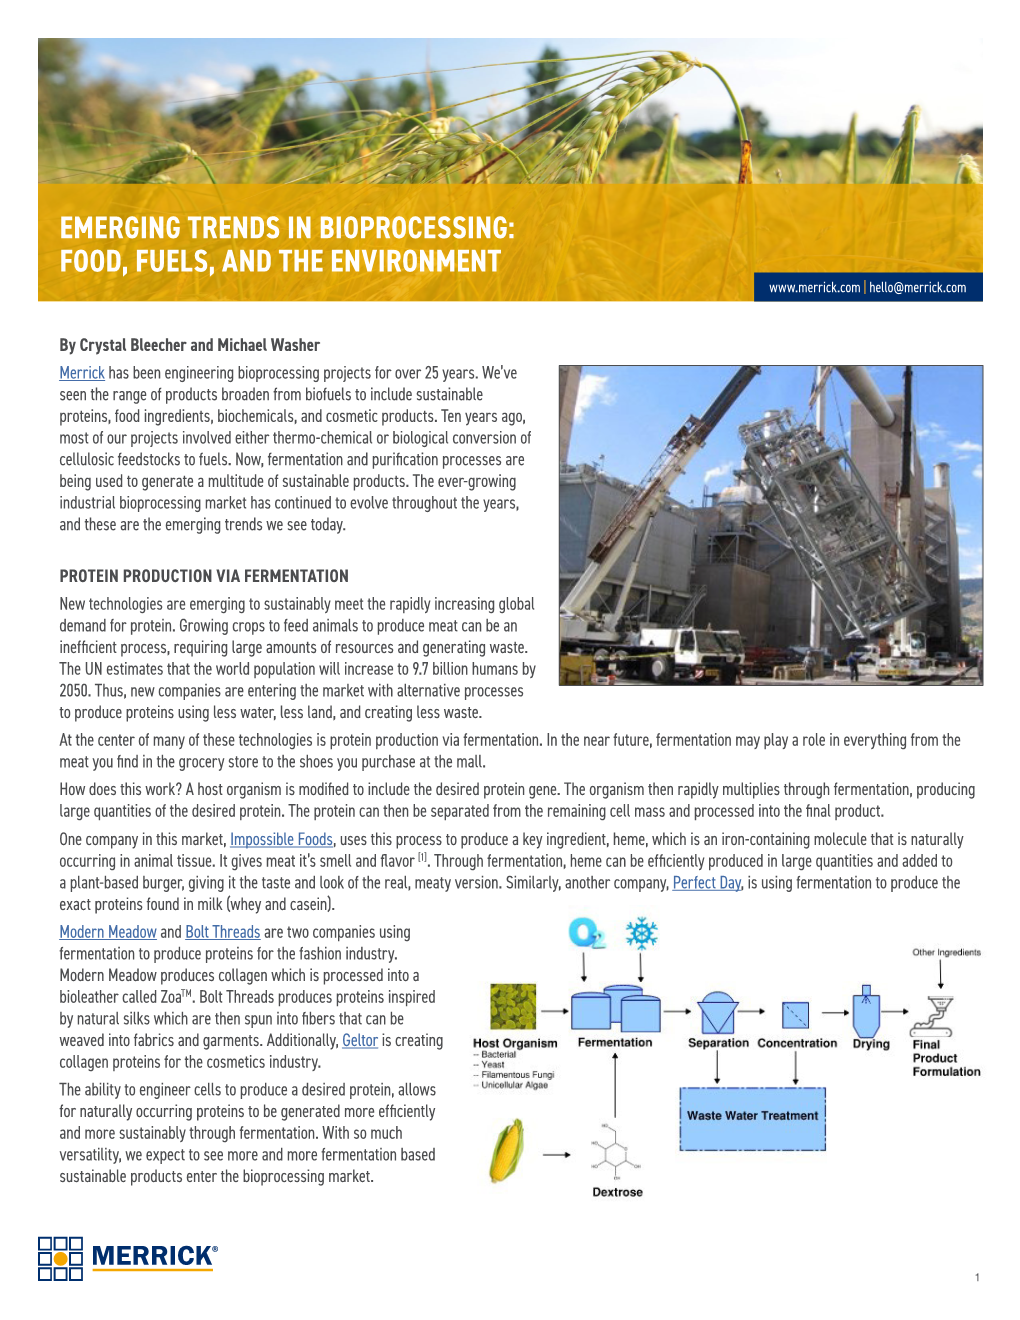 EMERGING TRENDS in BIOPROCESSING: FOOD, FUELS, and the ENVIRONMENT | Hello@Merrick.Com